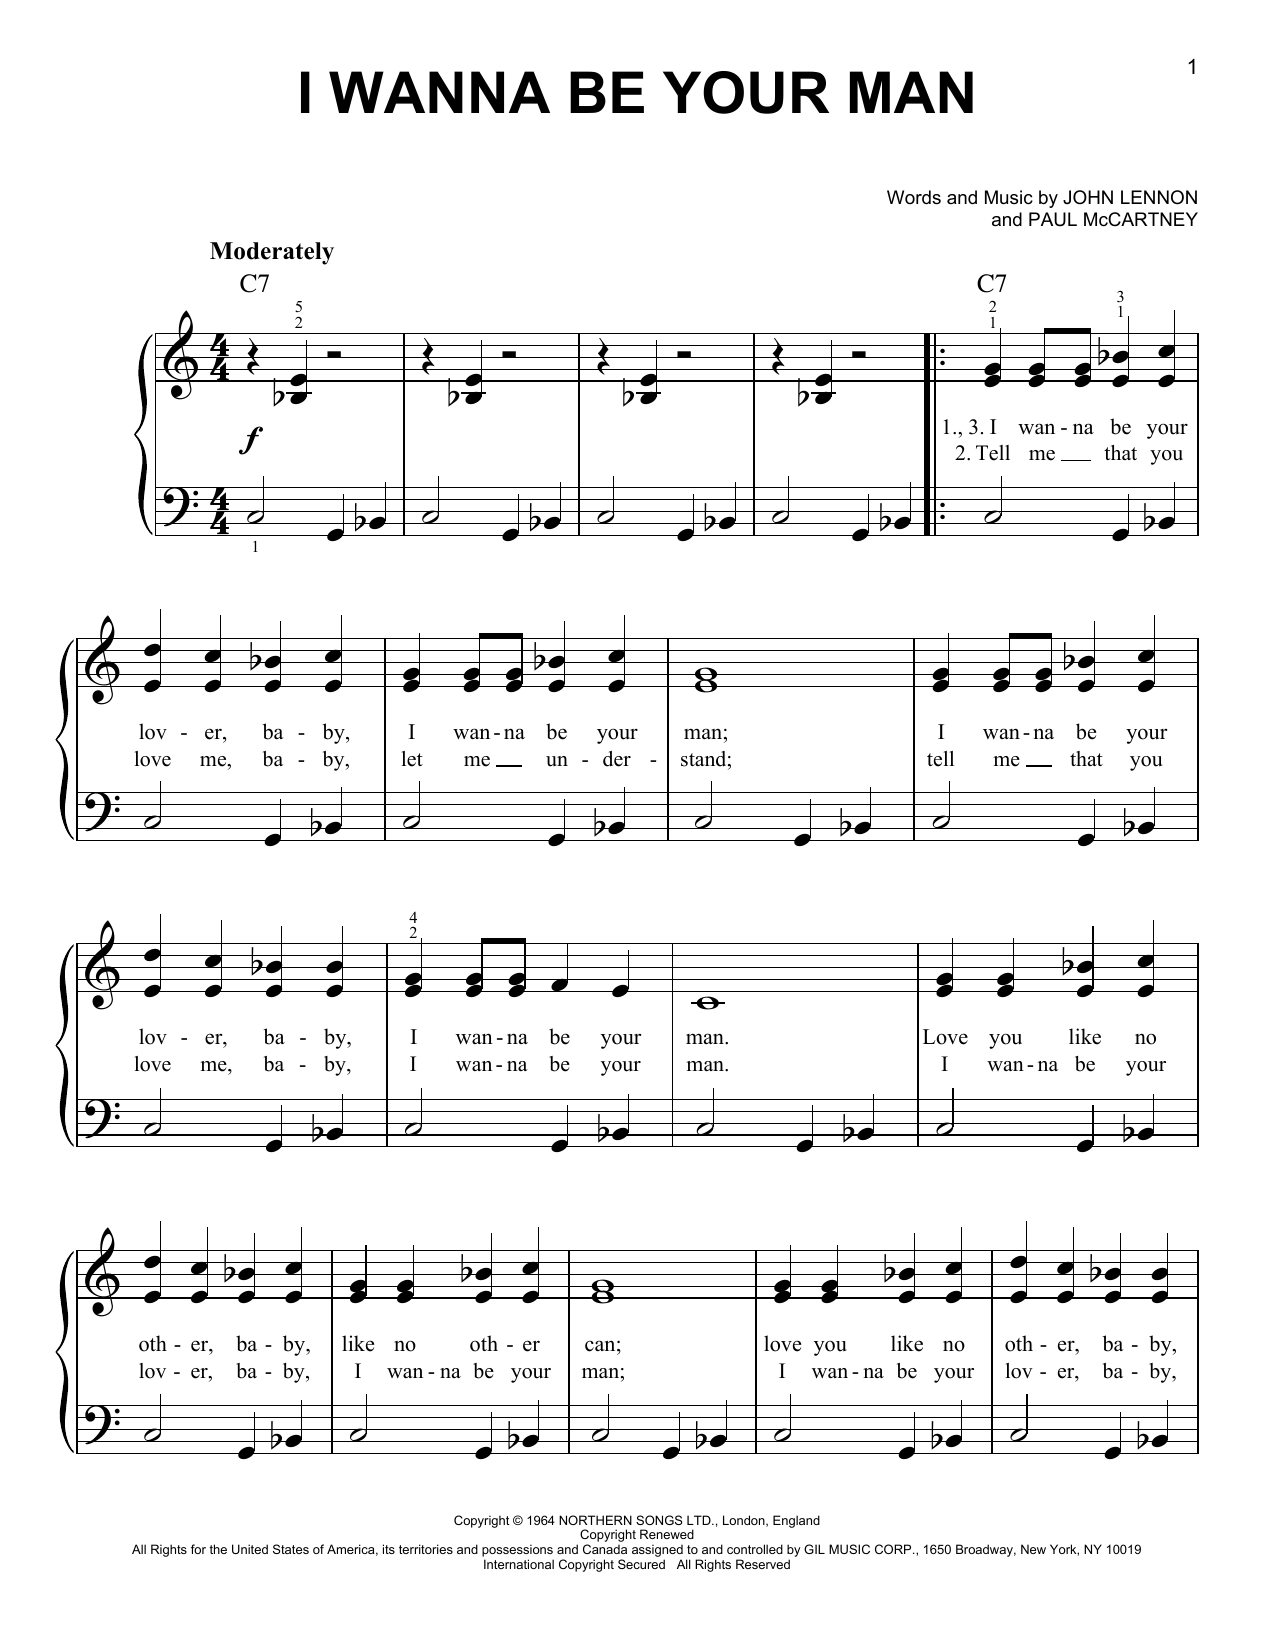 Download The Beatles I Wanna Be Your Man Sheet Music